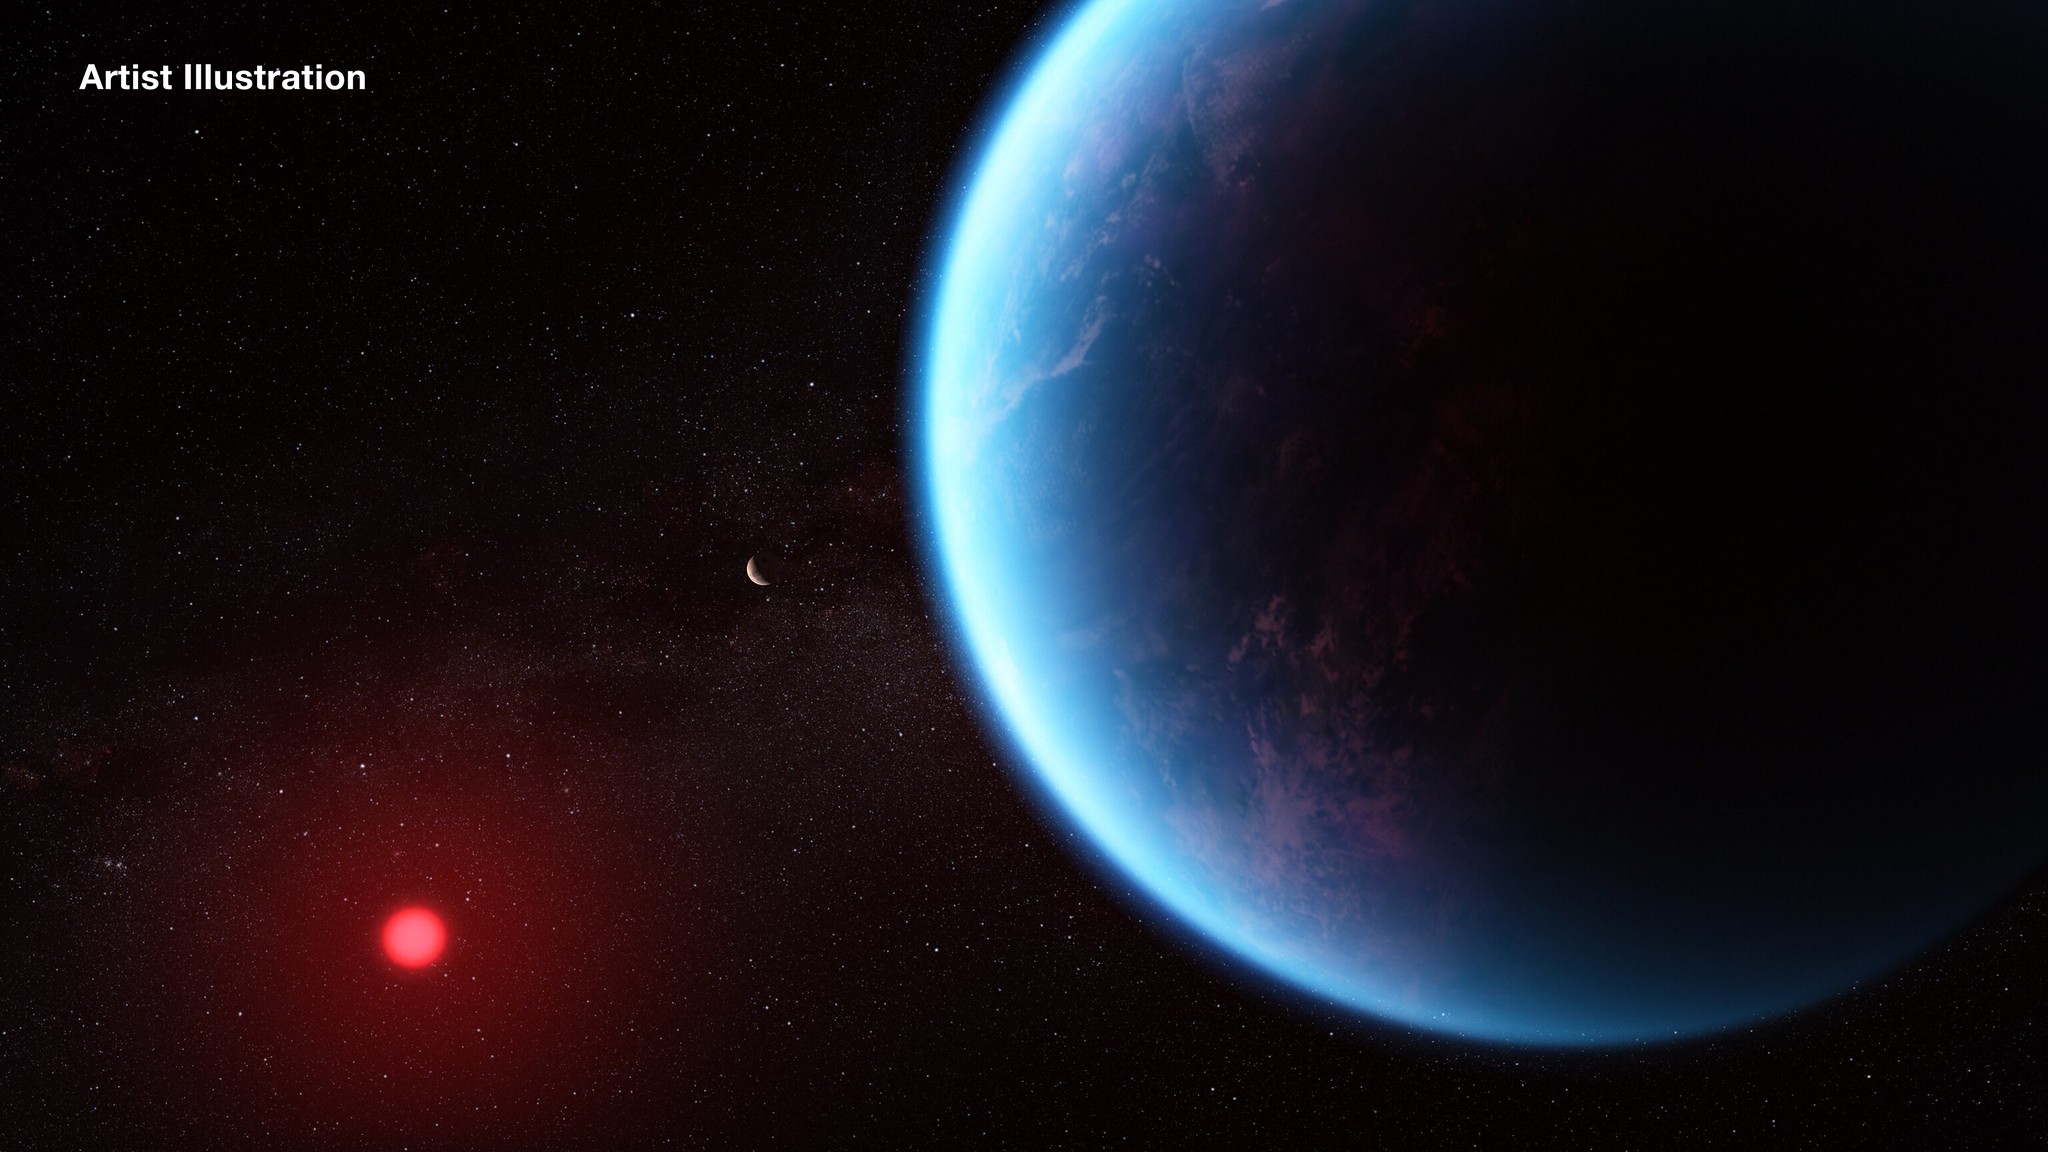 This artist illustration shows a blue planet on the right, with its small, glowing red star in the lower left. Between them is another planet, a tiny white crescent in the distance.